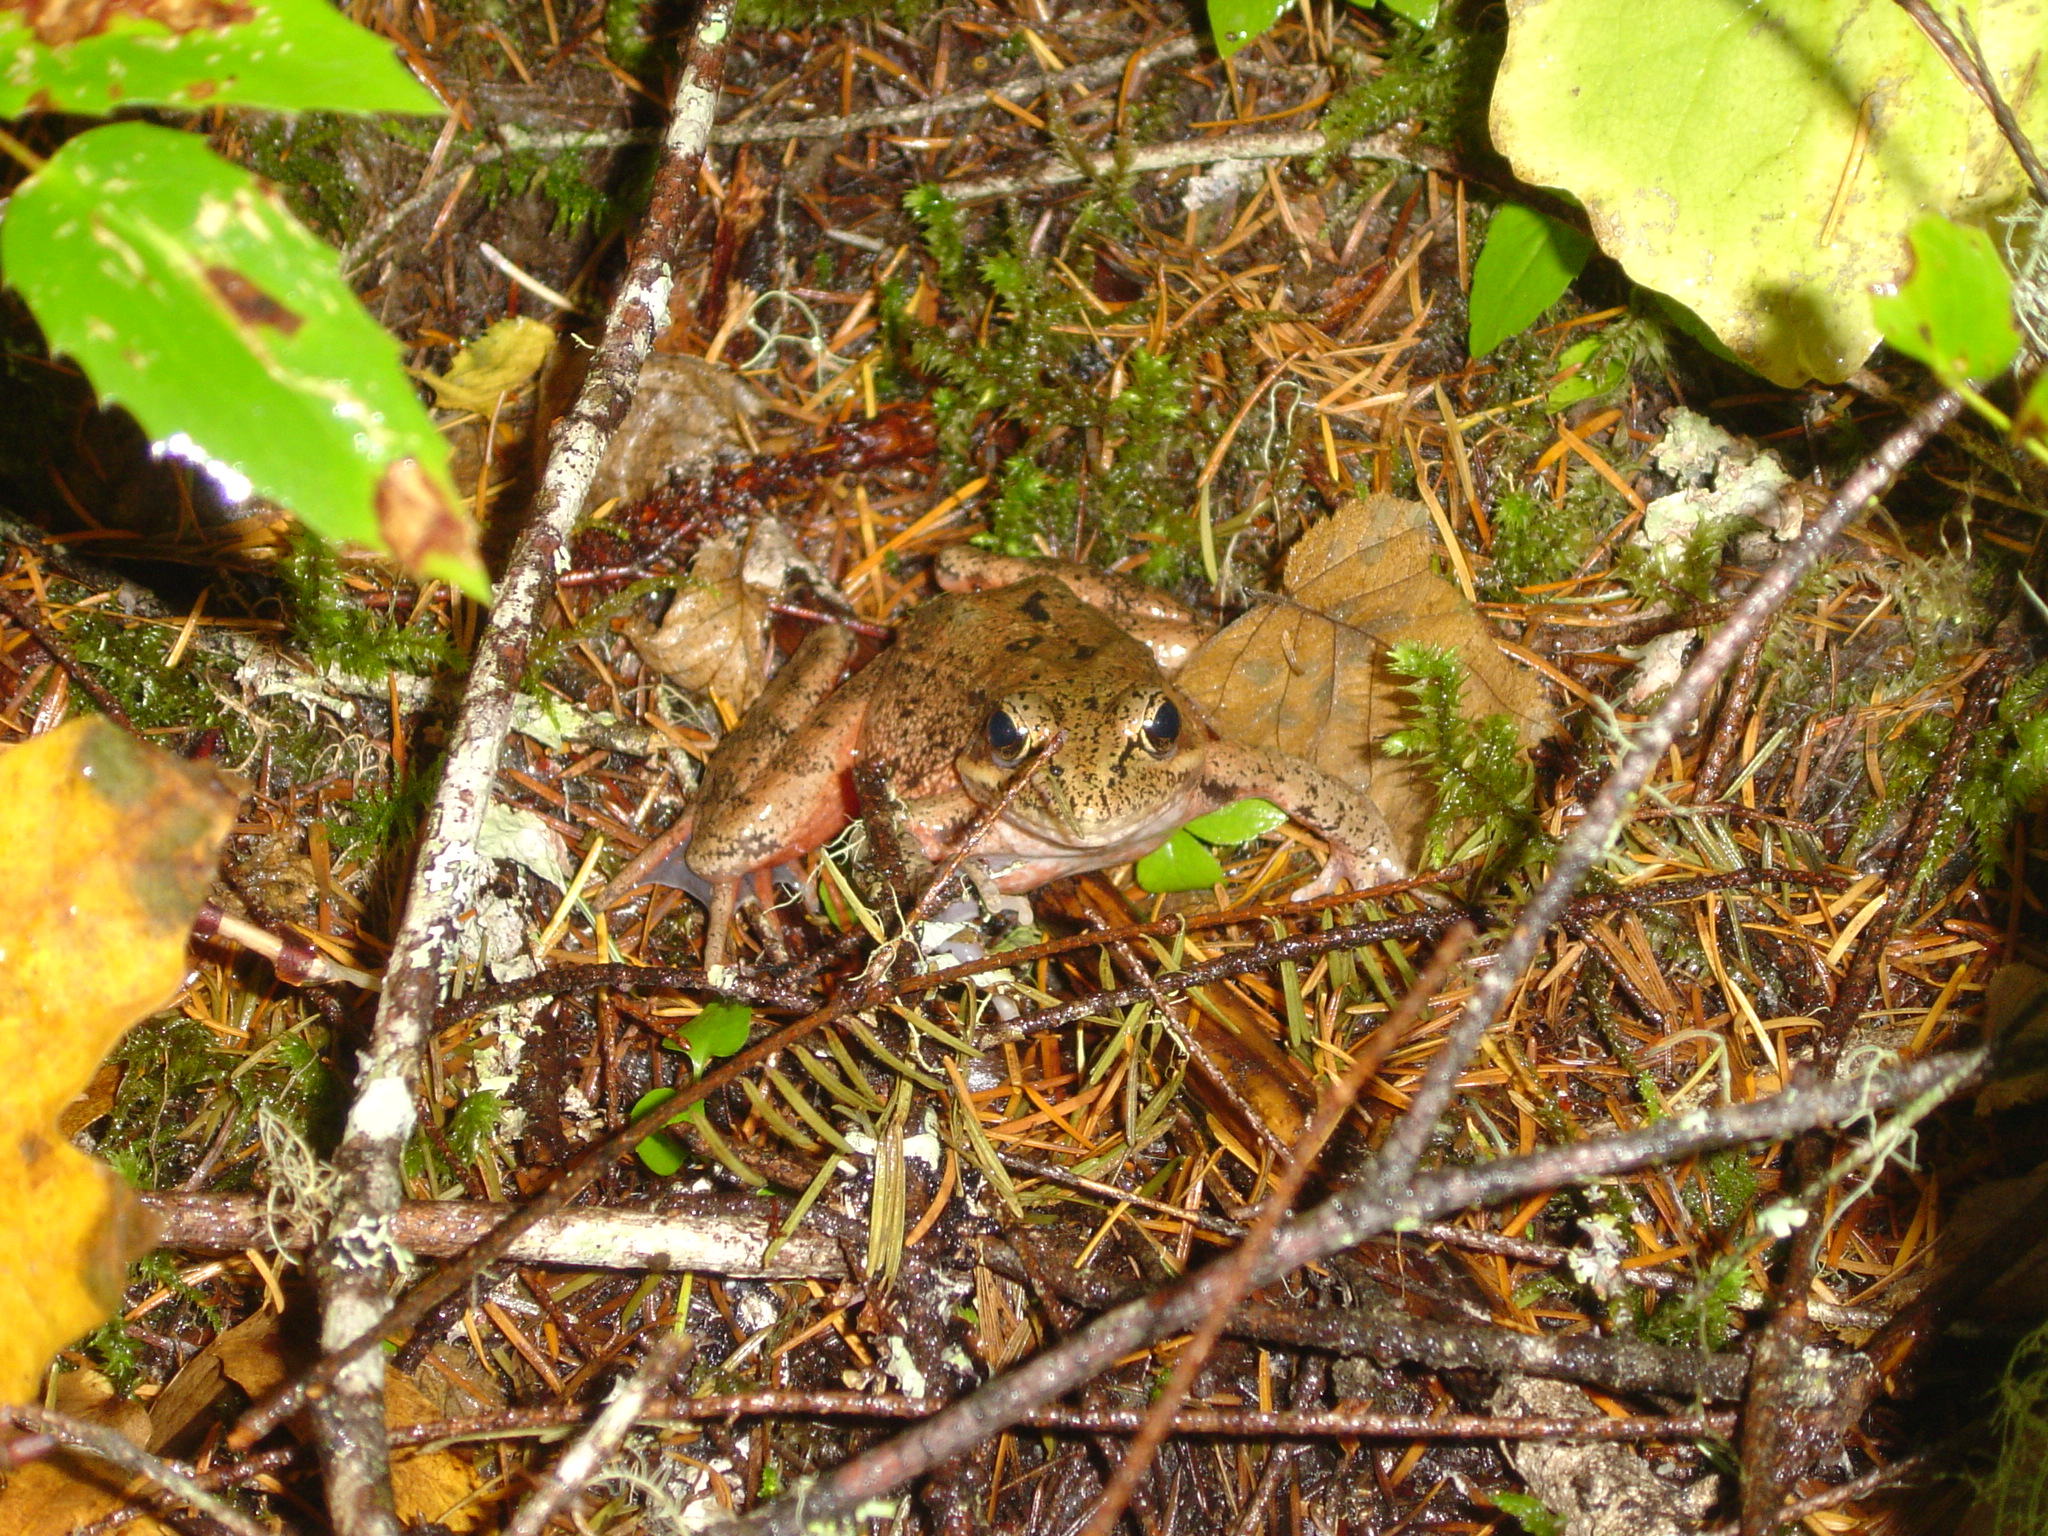 This is a photo close-up of a frog looking back at the camera. The frog camouflages with the light brown groundcover and haircap moss on the wet ground.